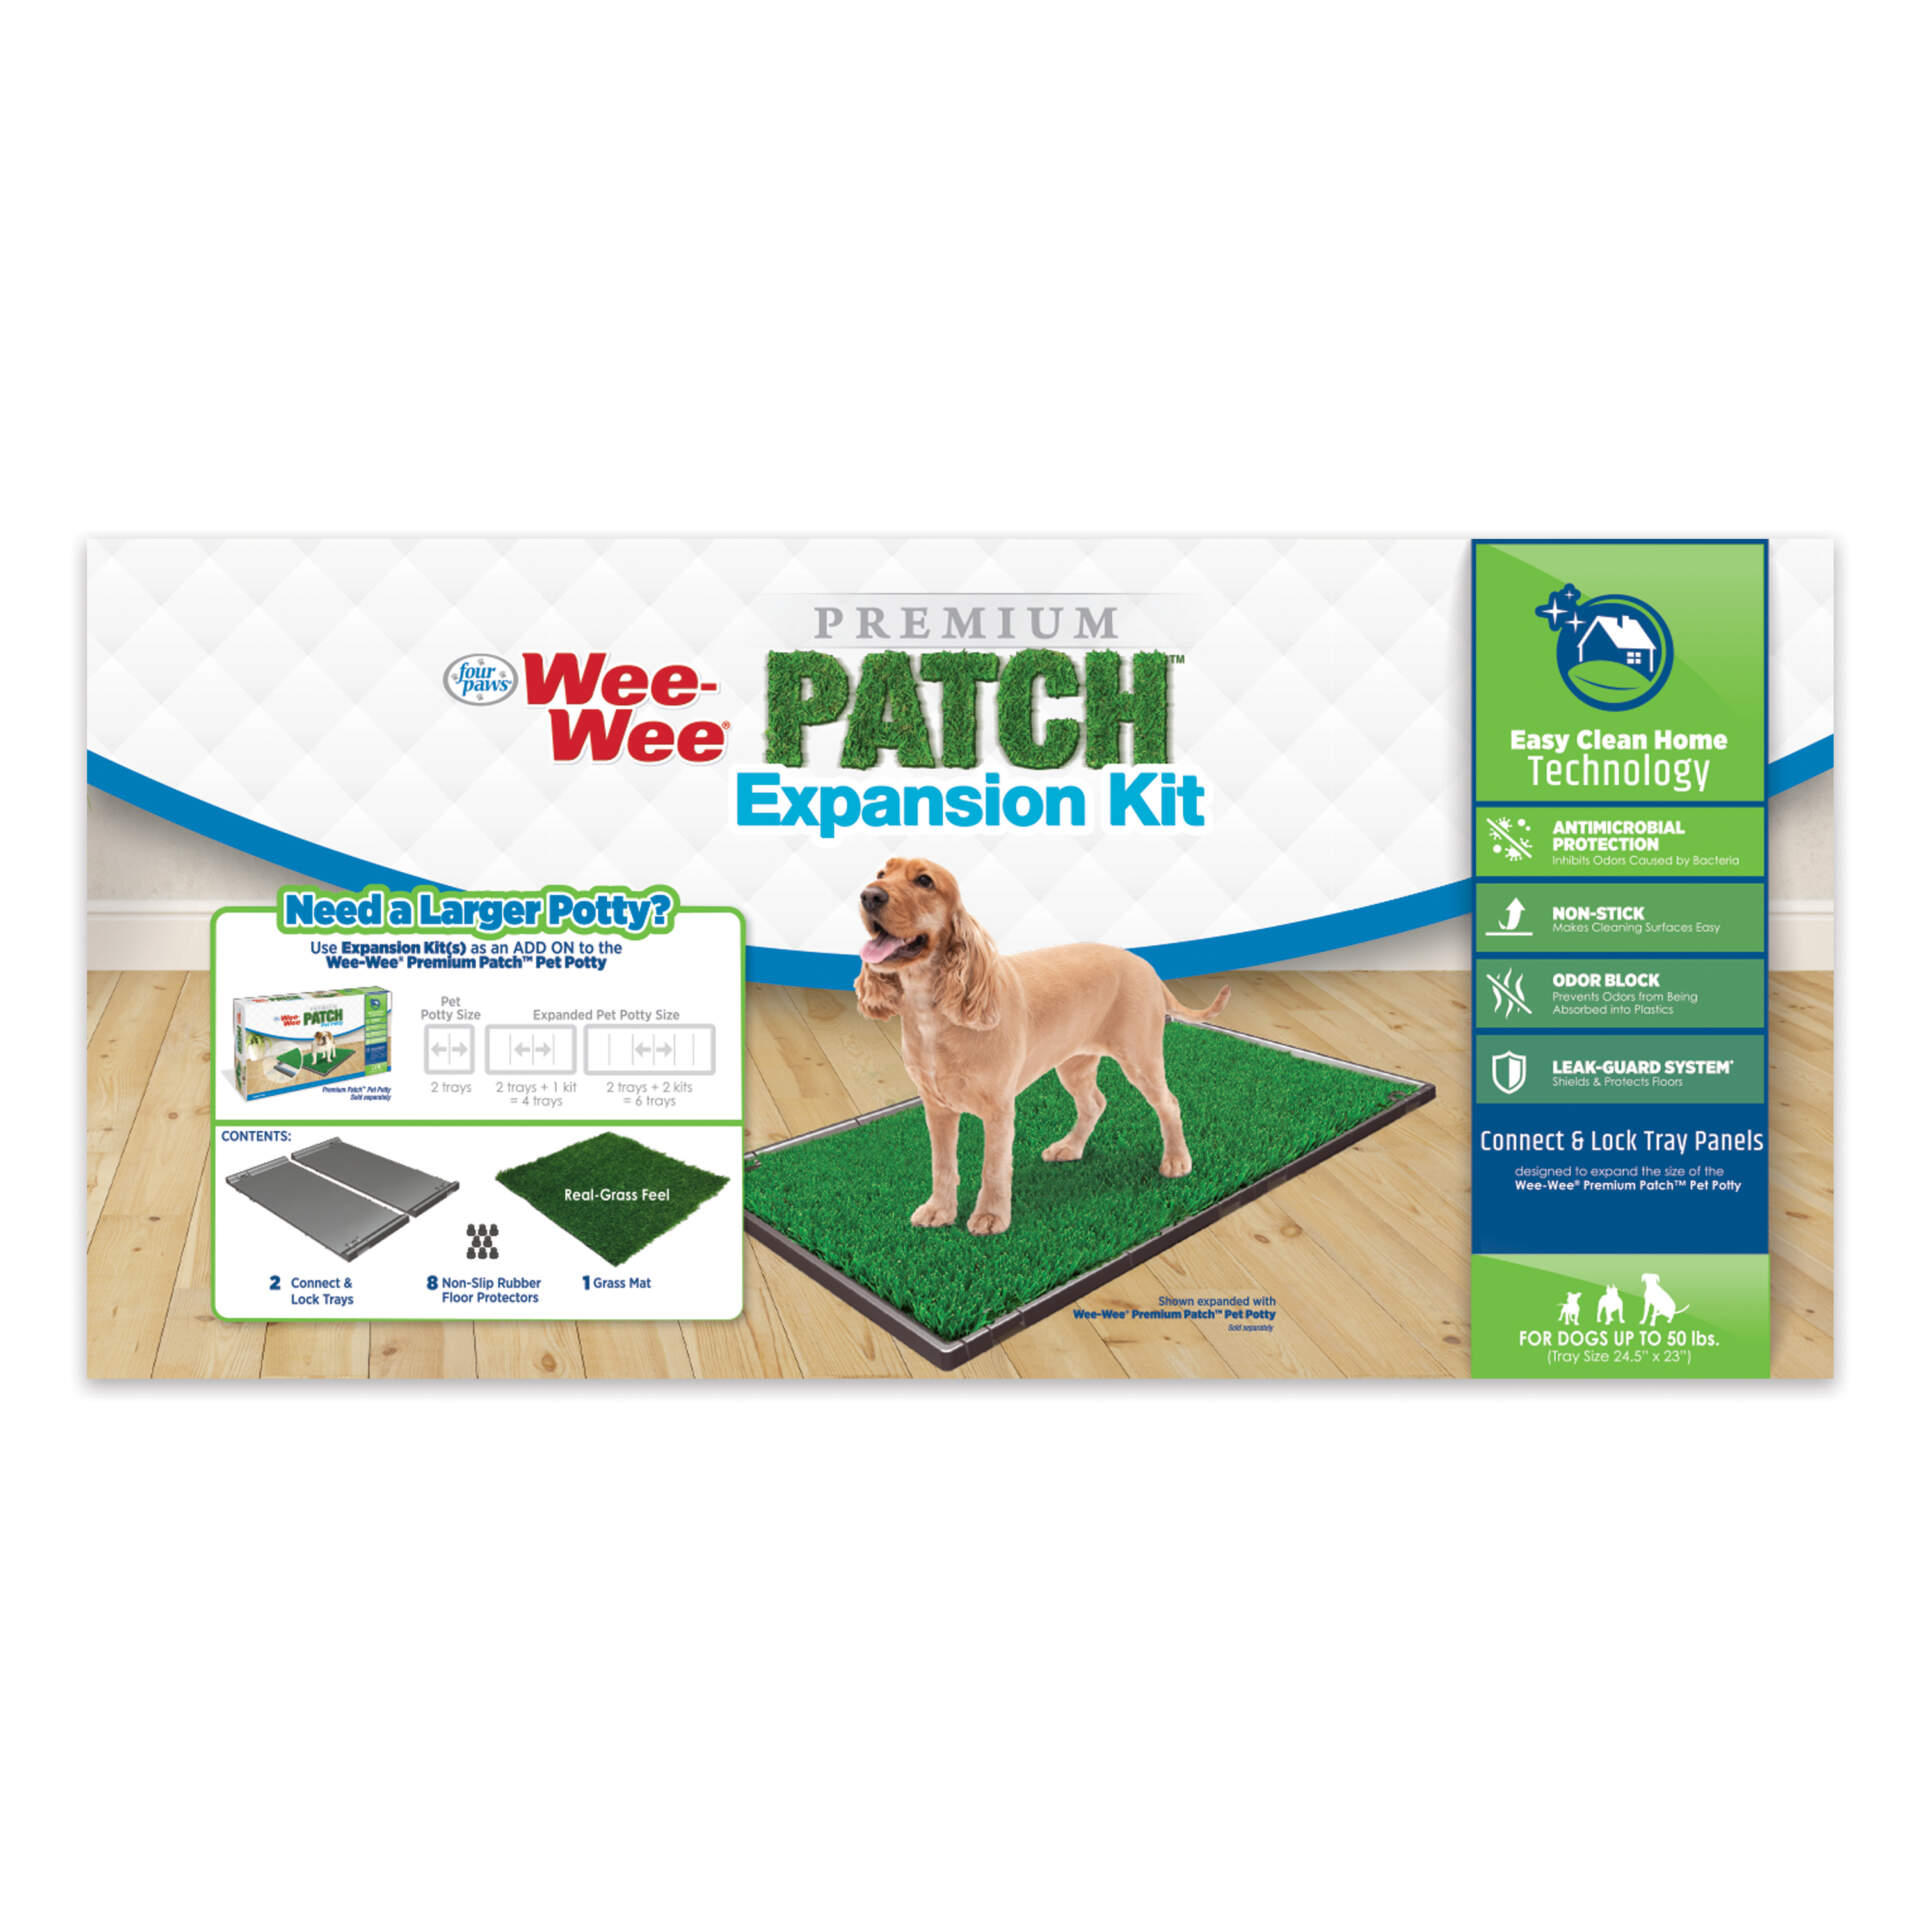 045663974794-wee-wee-premium-patch-expansion-kit-in-packaging-front